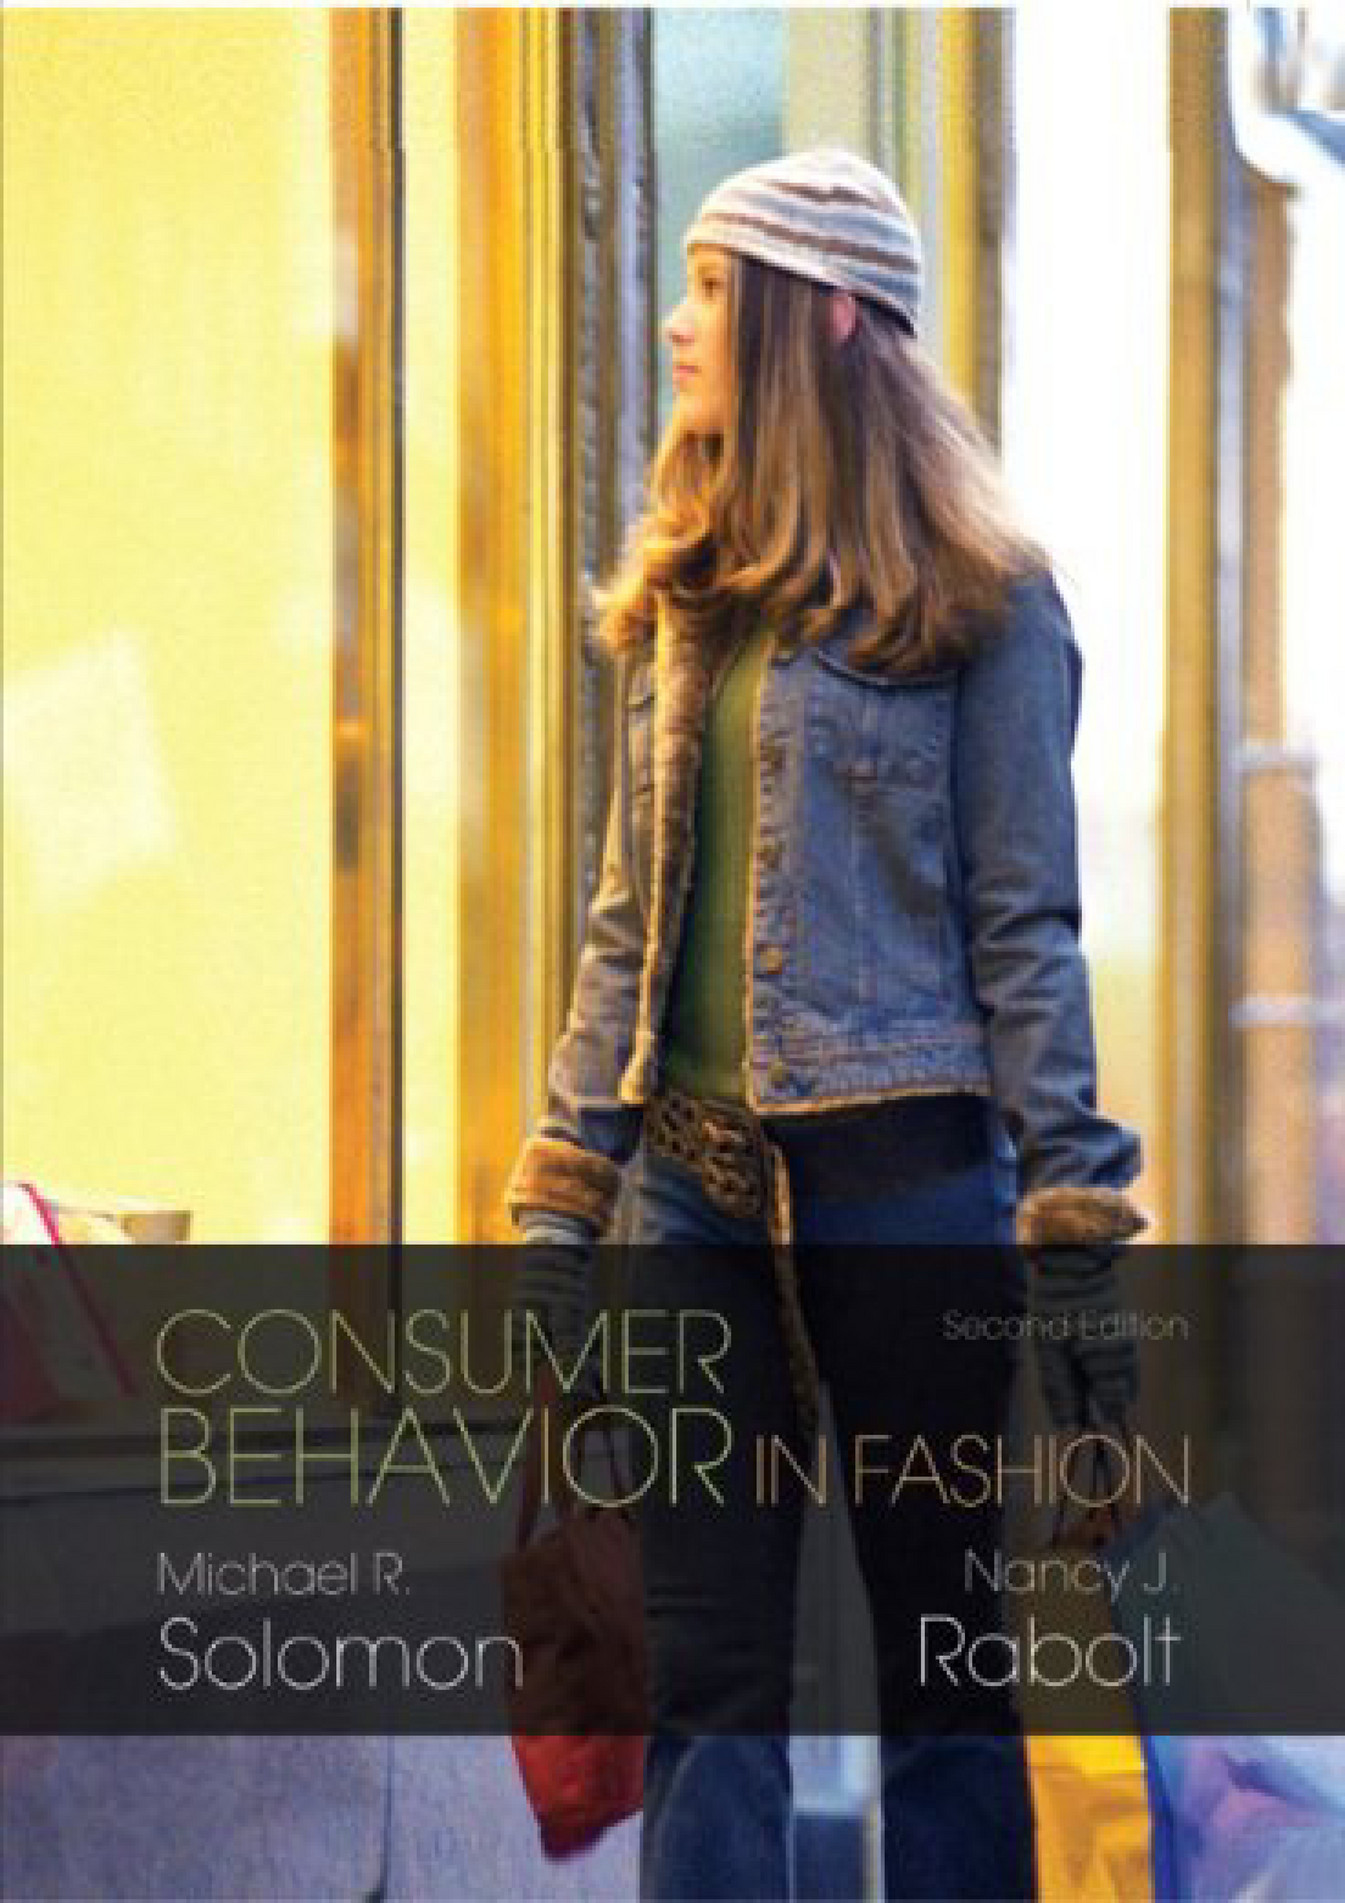 danial-read-consumer-behavior-in-fashion-page-1-created-with